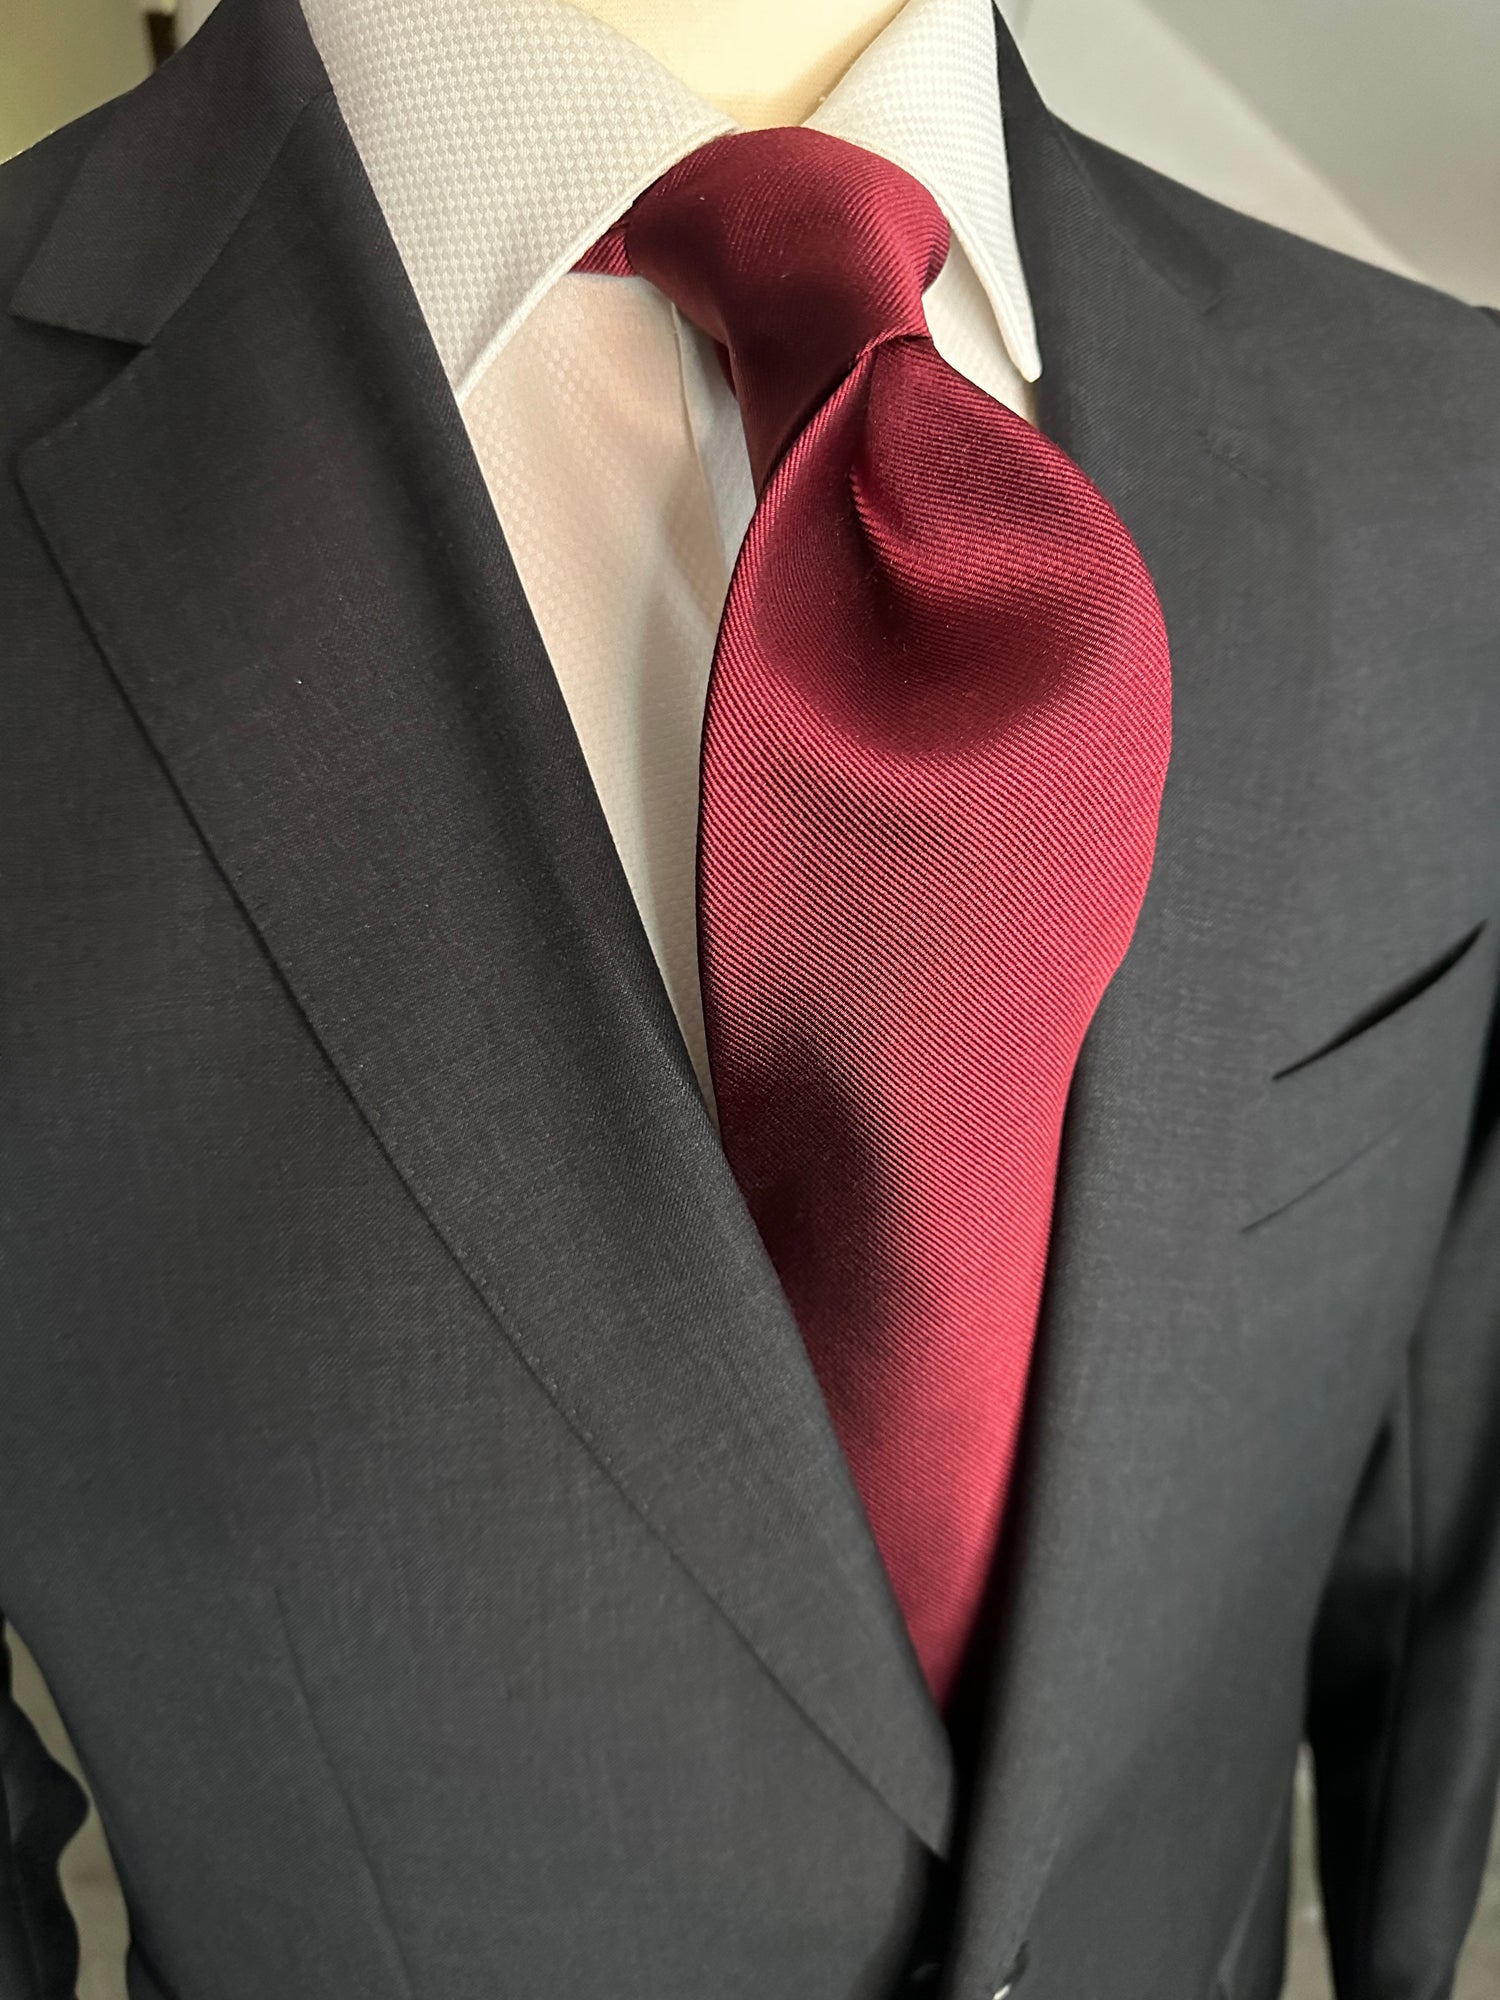 Solid ties are beautifully paired with the more busy of patters of bold stripes and heavy plaids. However, there is something so understated and elegant about a solid tie with a solid suit. Whether that be navy, charcoal or black a burgundy tie fits well with a white shirt and even a navy blazer with jeans.